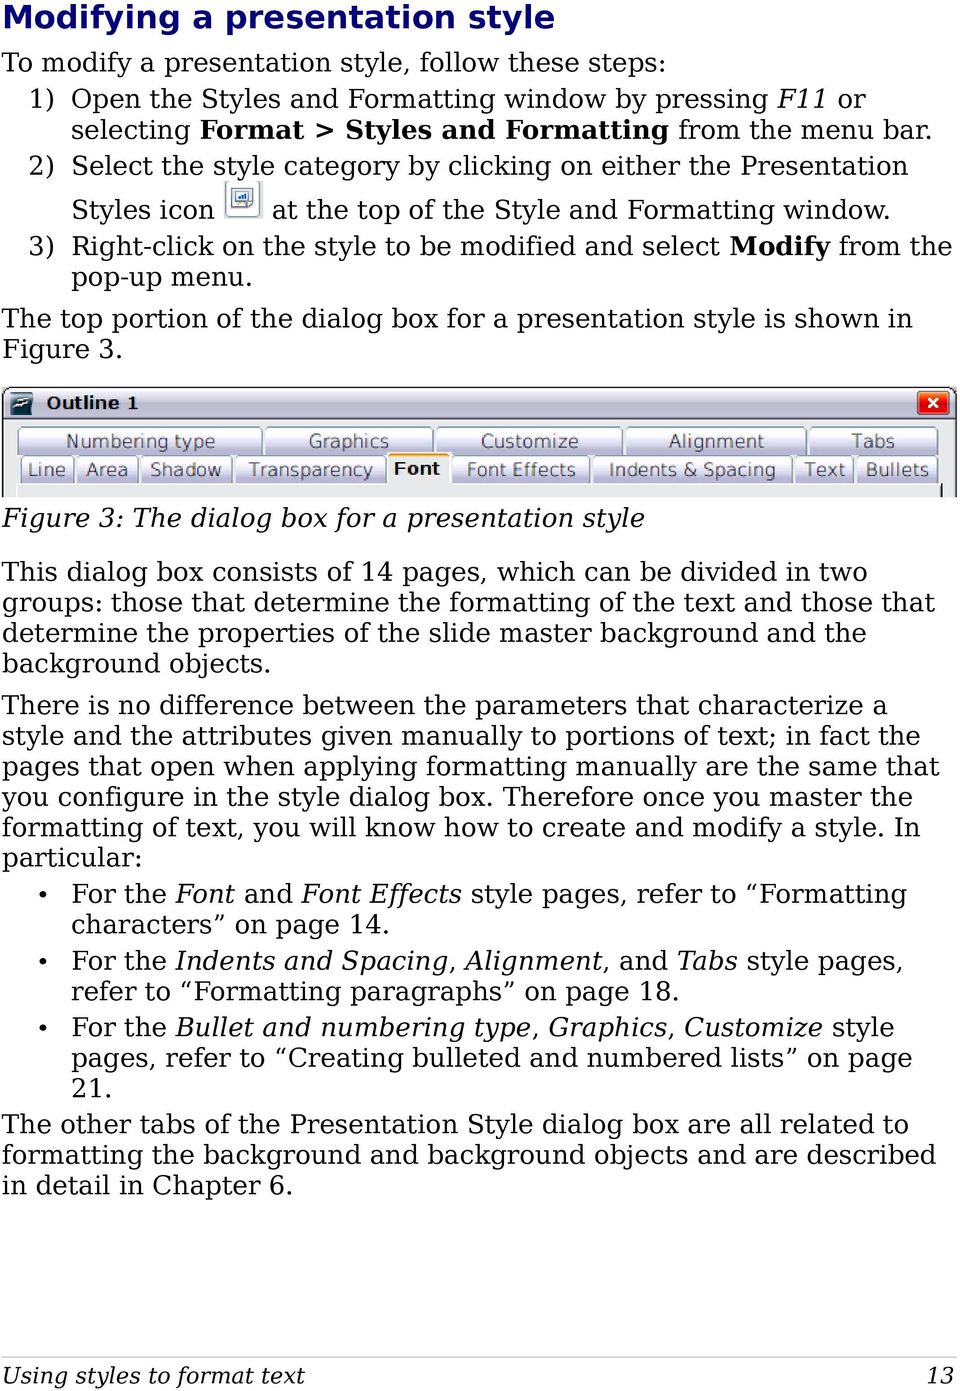 3) Right-click on the style to be modified and select Modify from the pop-up menu. The top portion of the dialog box for a presentation style is shown in Figure 3.